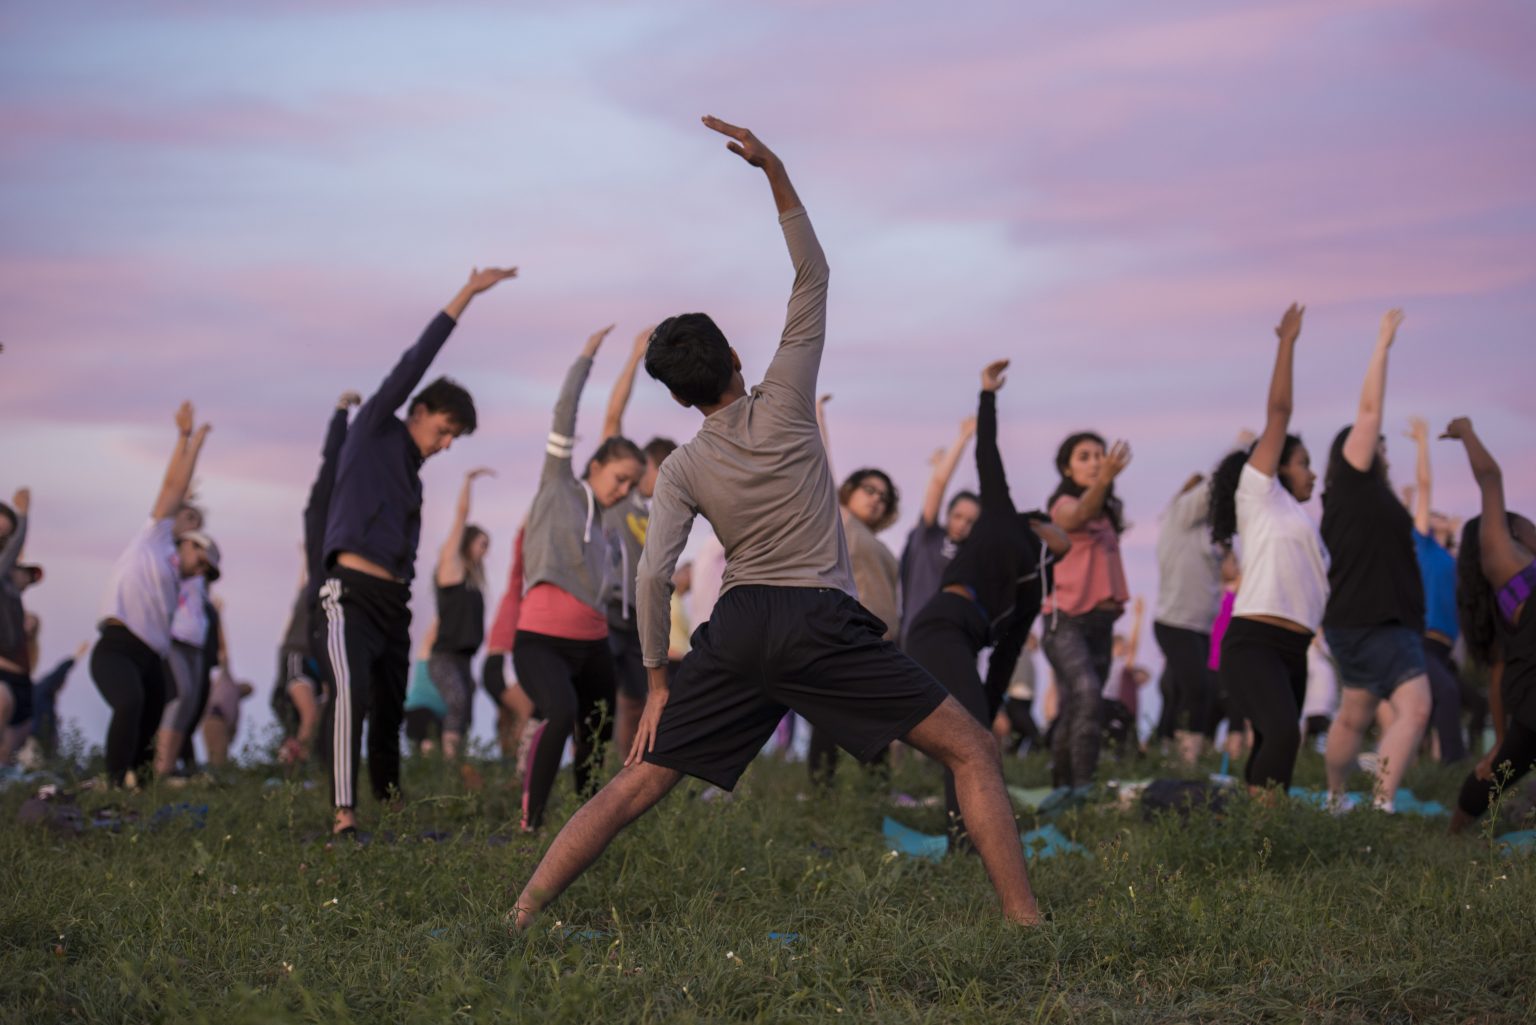 In the foreground, a male student of color stands in the grass and faces away from the camera in a yoga pose with his left arm on his left thigh and his right arm curved overhead. In the background, a diverse group of both male and female students attending the Yoga on Horsebarn Hill event face the camera, getting into the same pose.